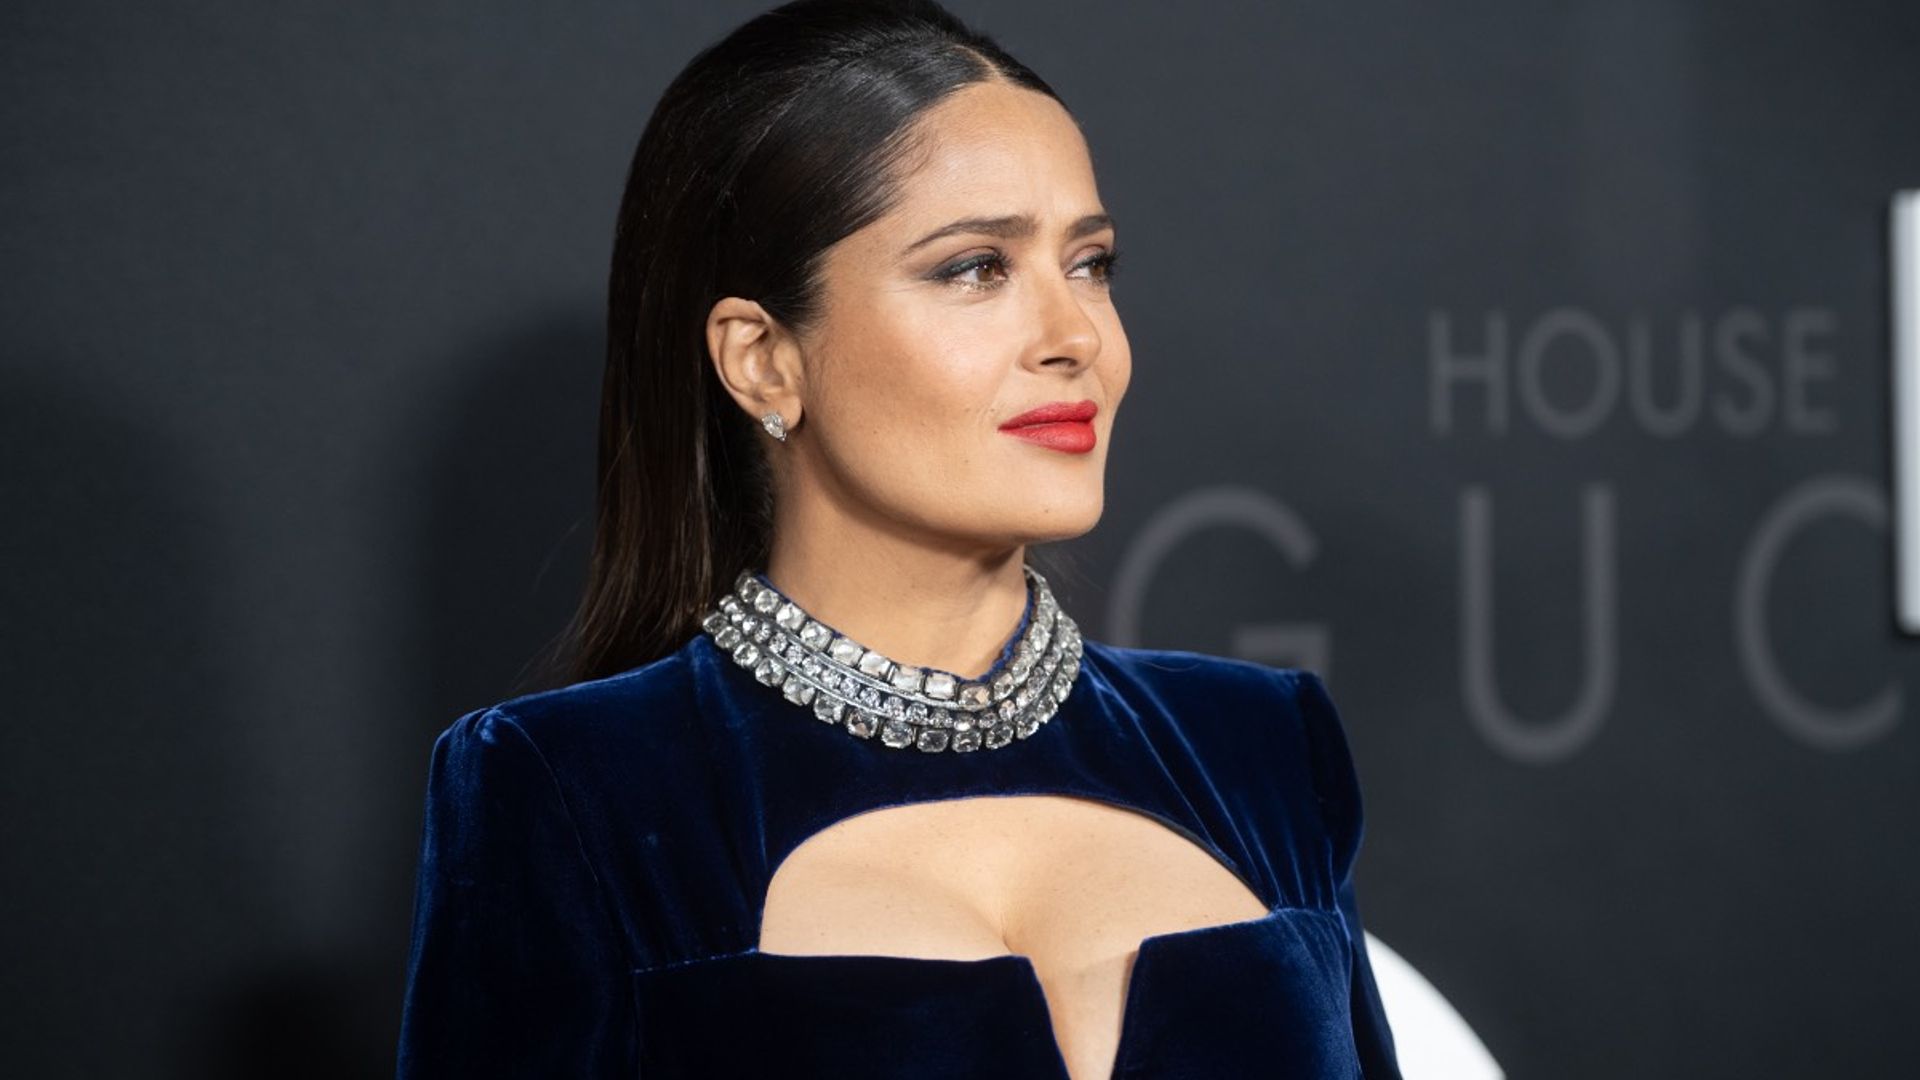 Salma Hayek delights fans with star-studded clip - and it's so nostalgic!